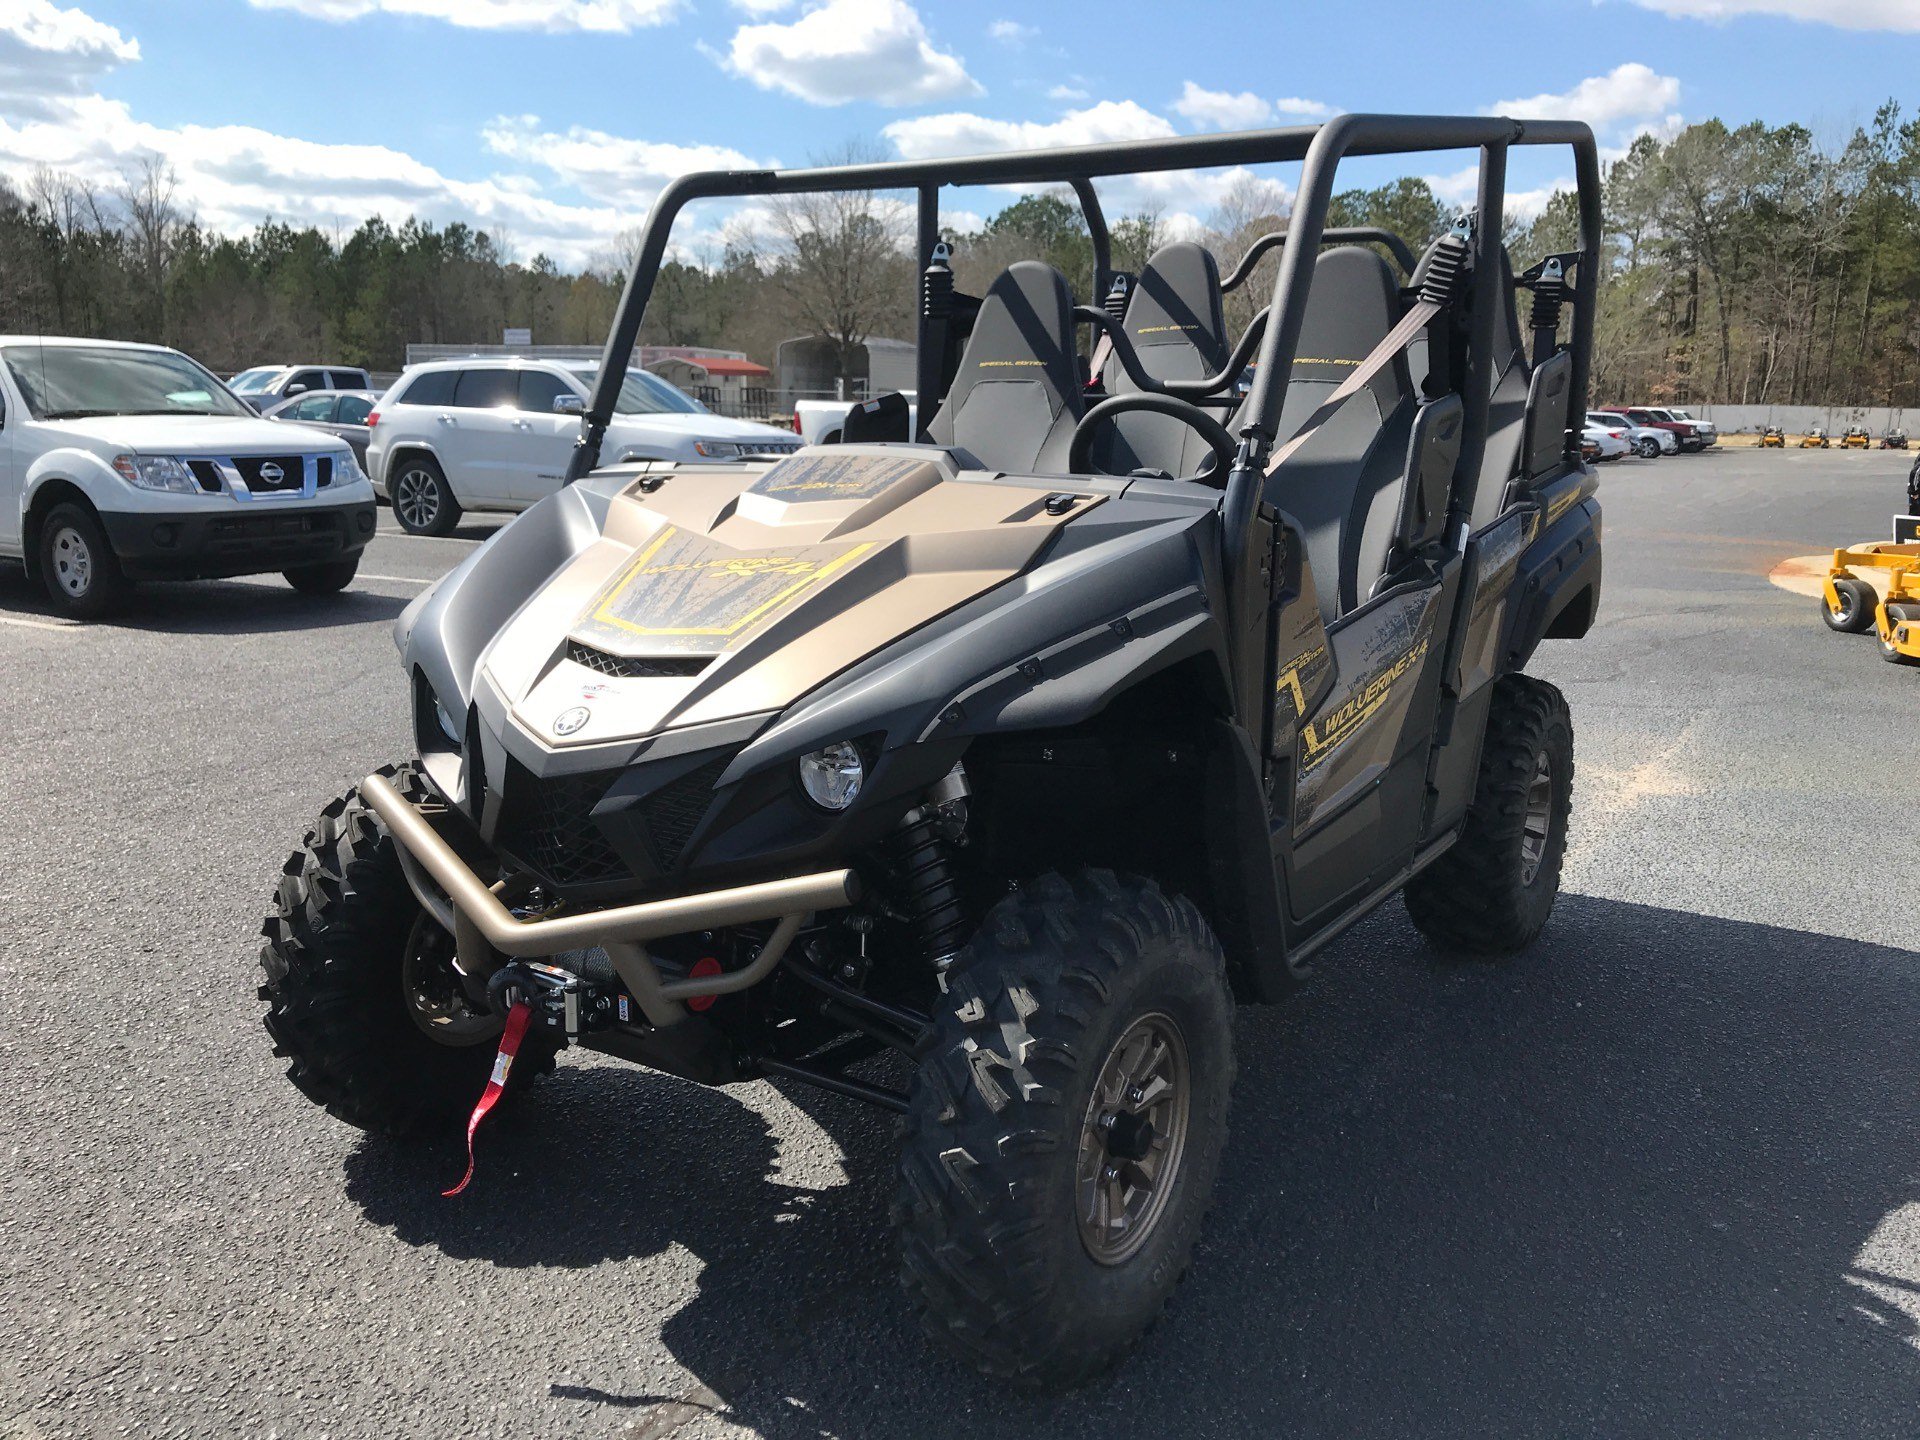 New 2020 Yamaha Wolverine X4 XTR 850 Utility Vehicles in Greenville